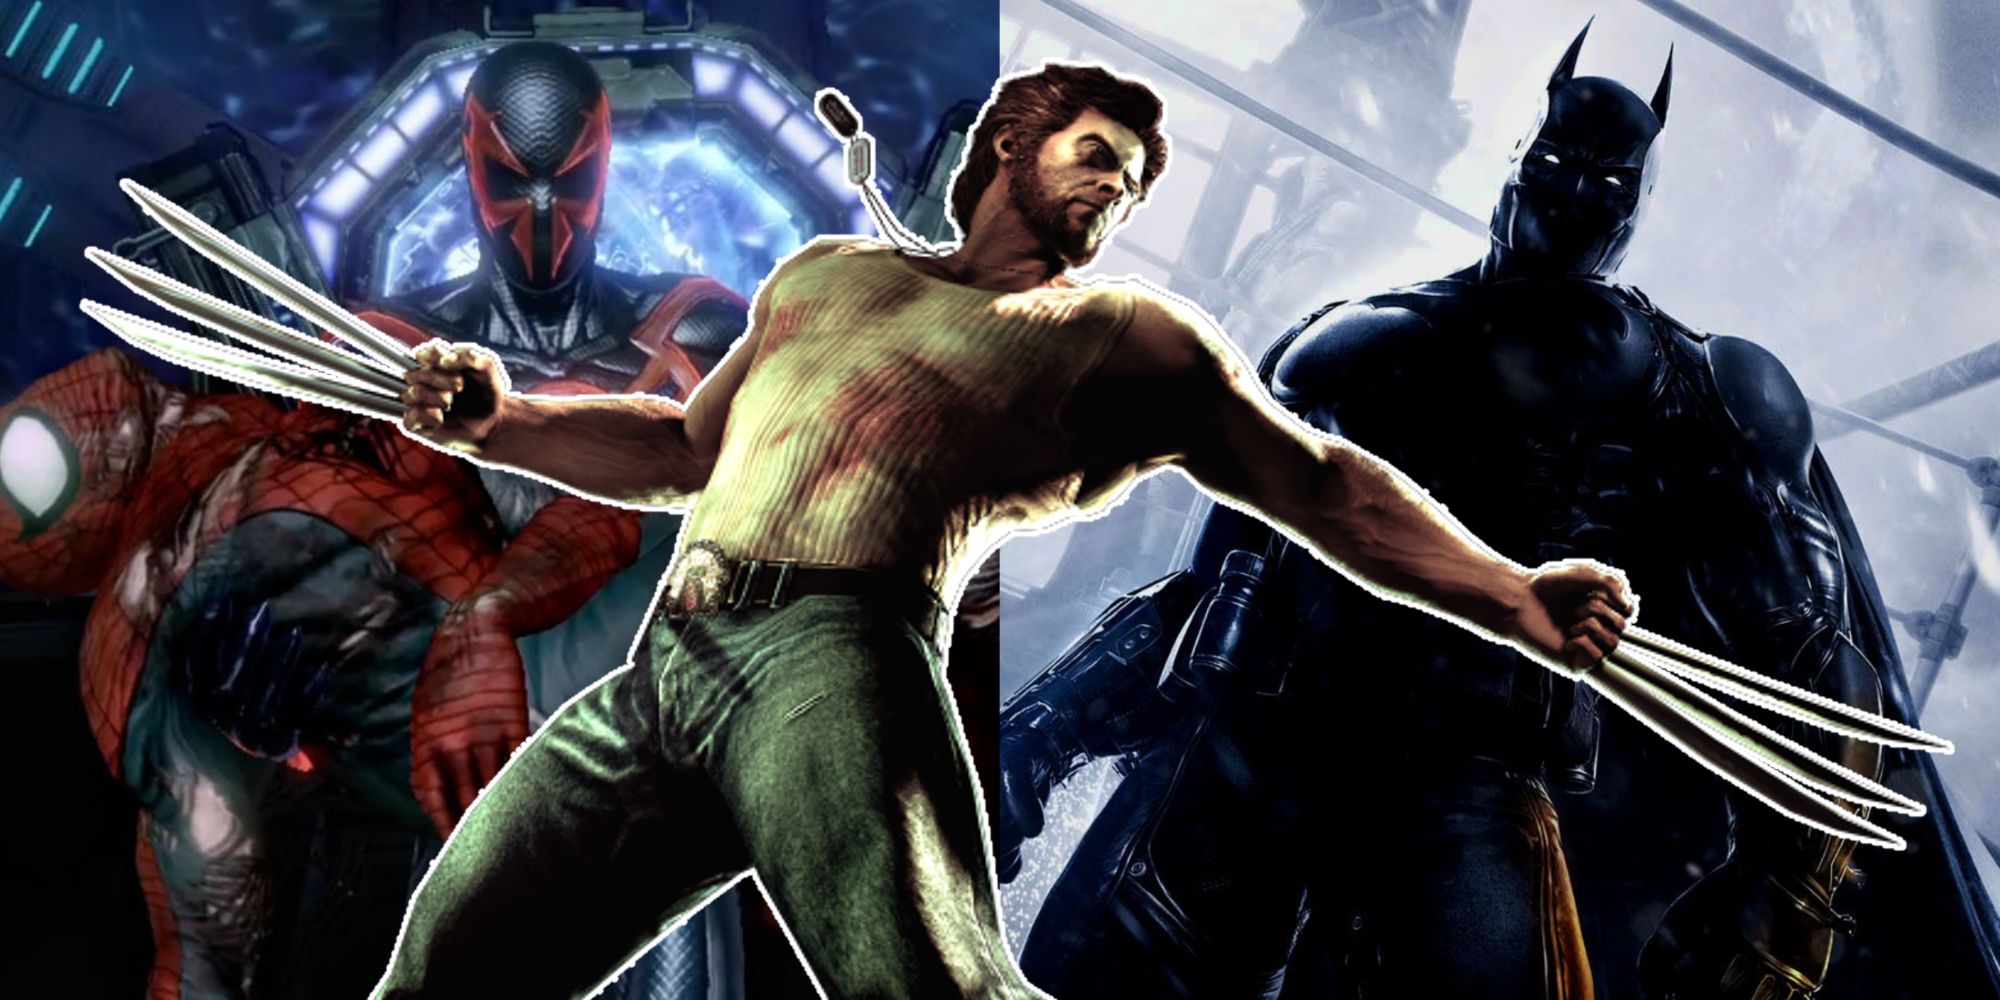 Split image of Spider-Man, Batman, and Wolverine from various underrated superhero games